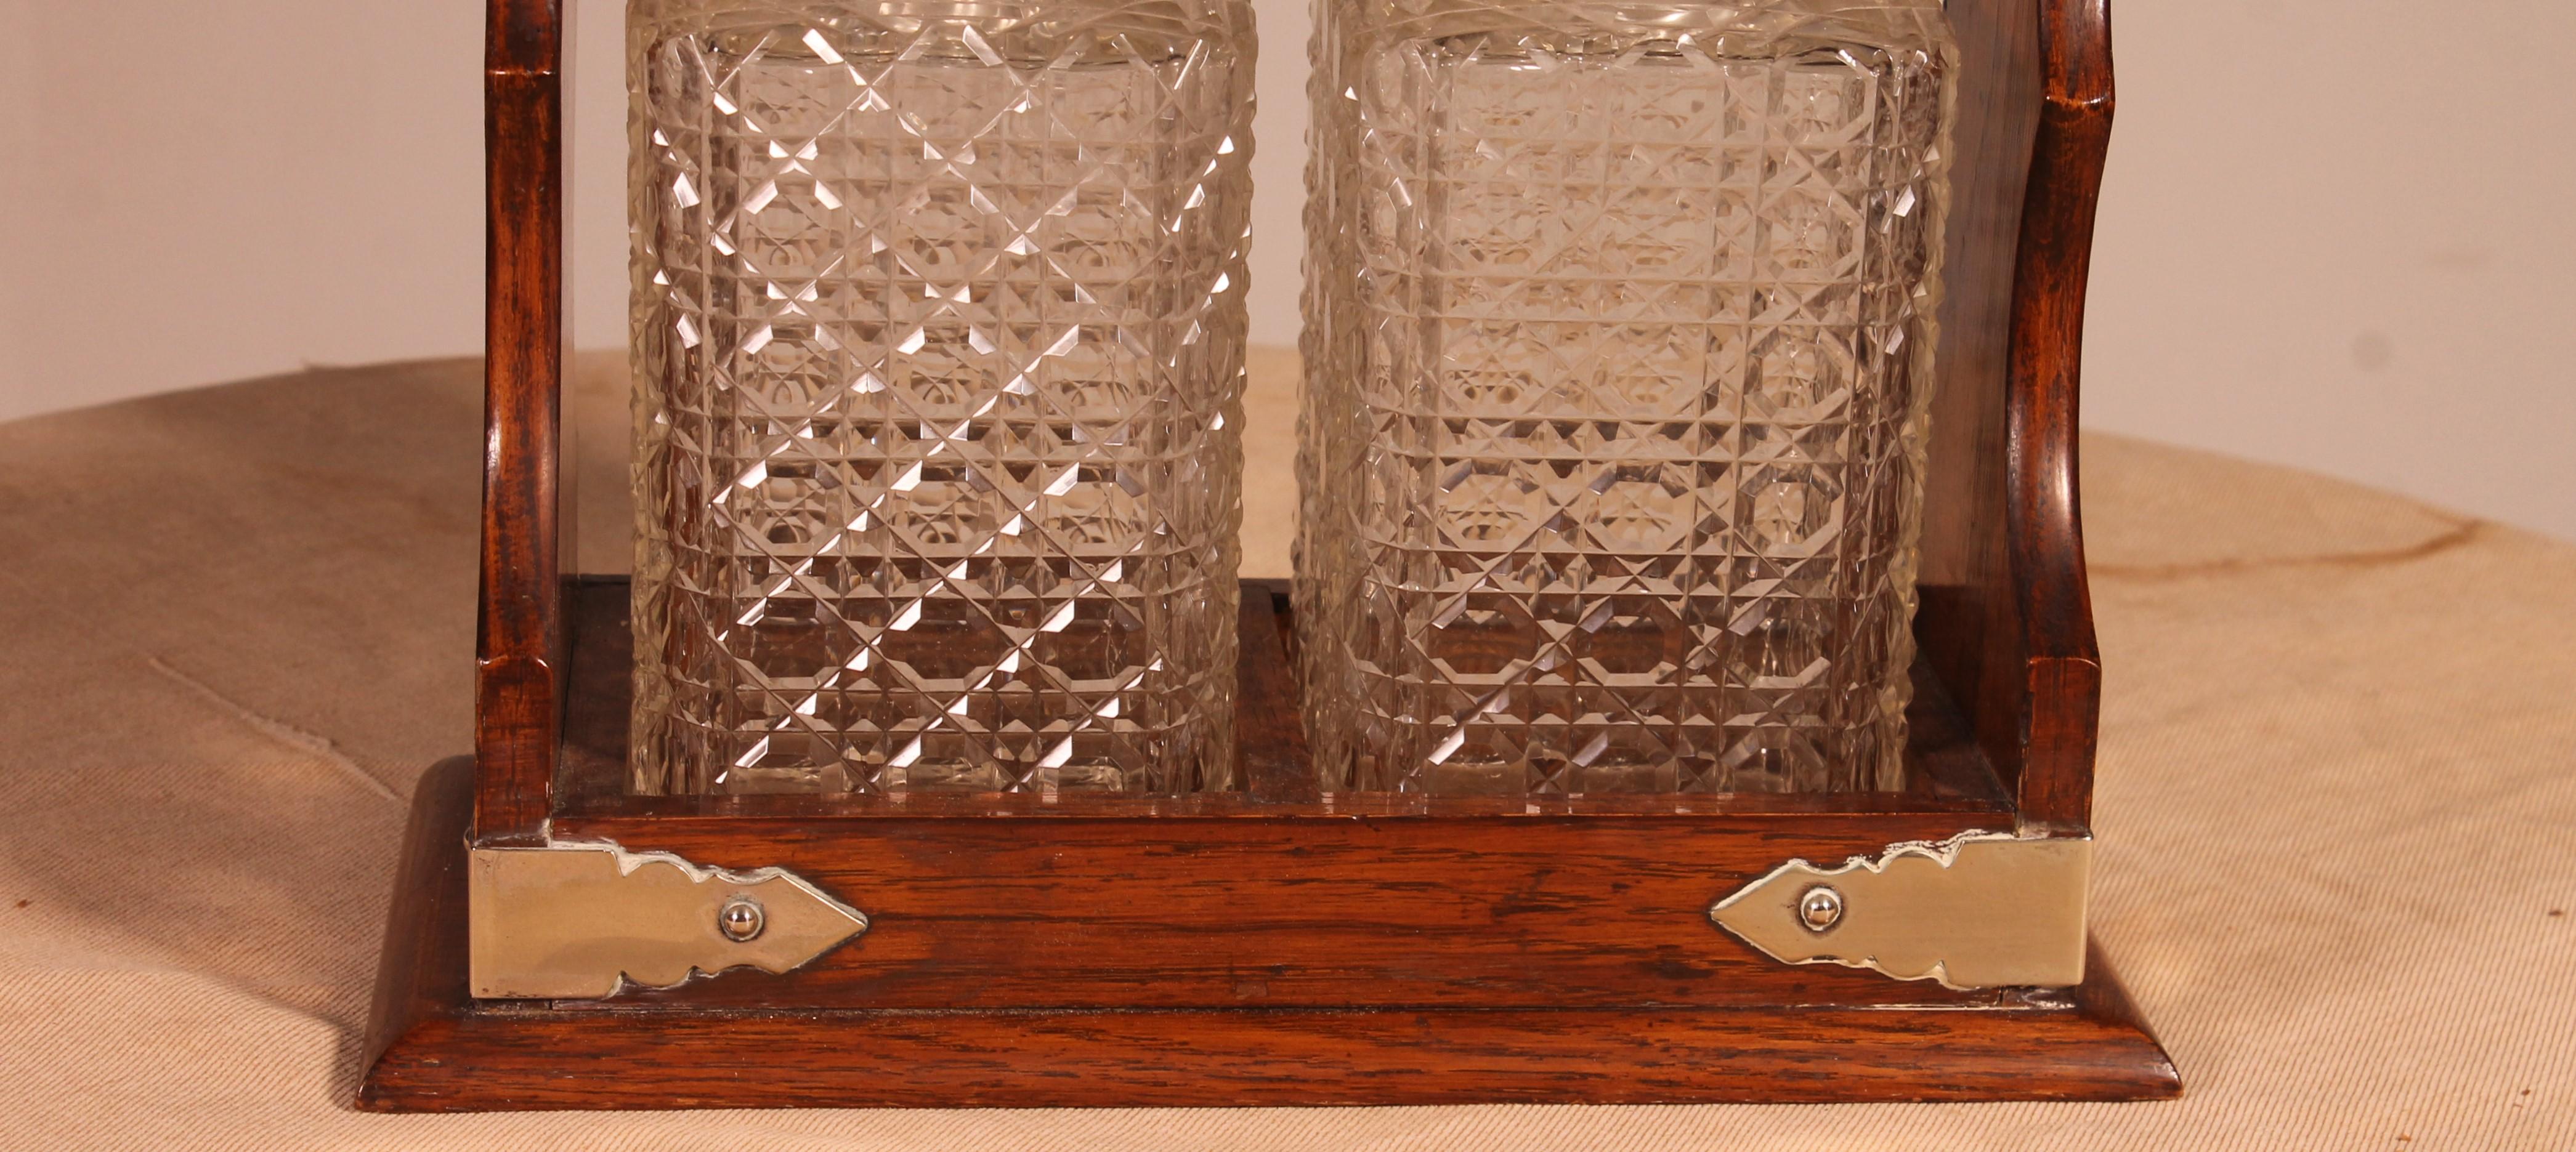 19th century whiskey cellar called tantalus in oak, composed of two square crystal bottles with their stoppers

the glassware is in good condition, the lock works perfectly

Very decorative object which can also be used
Oak with a beautiful patina
